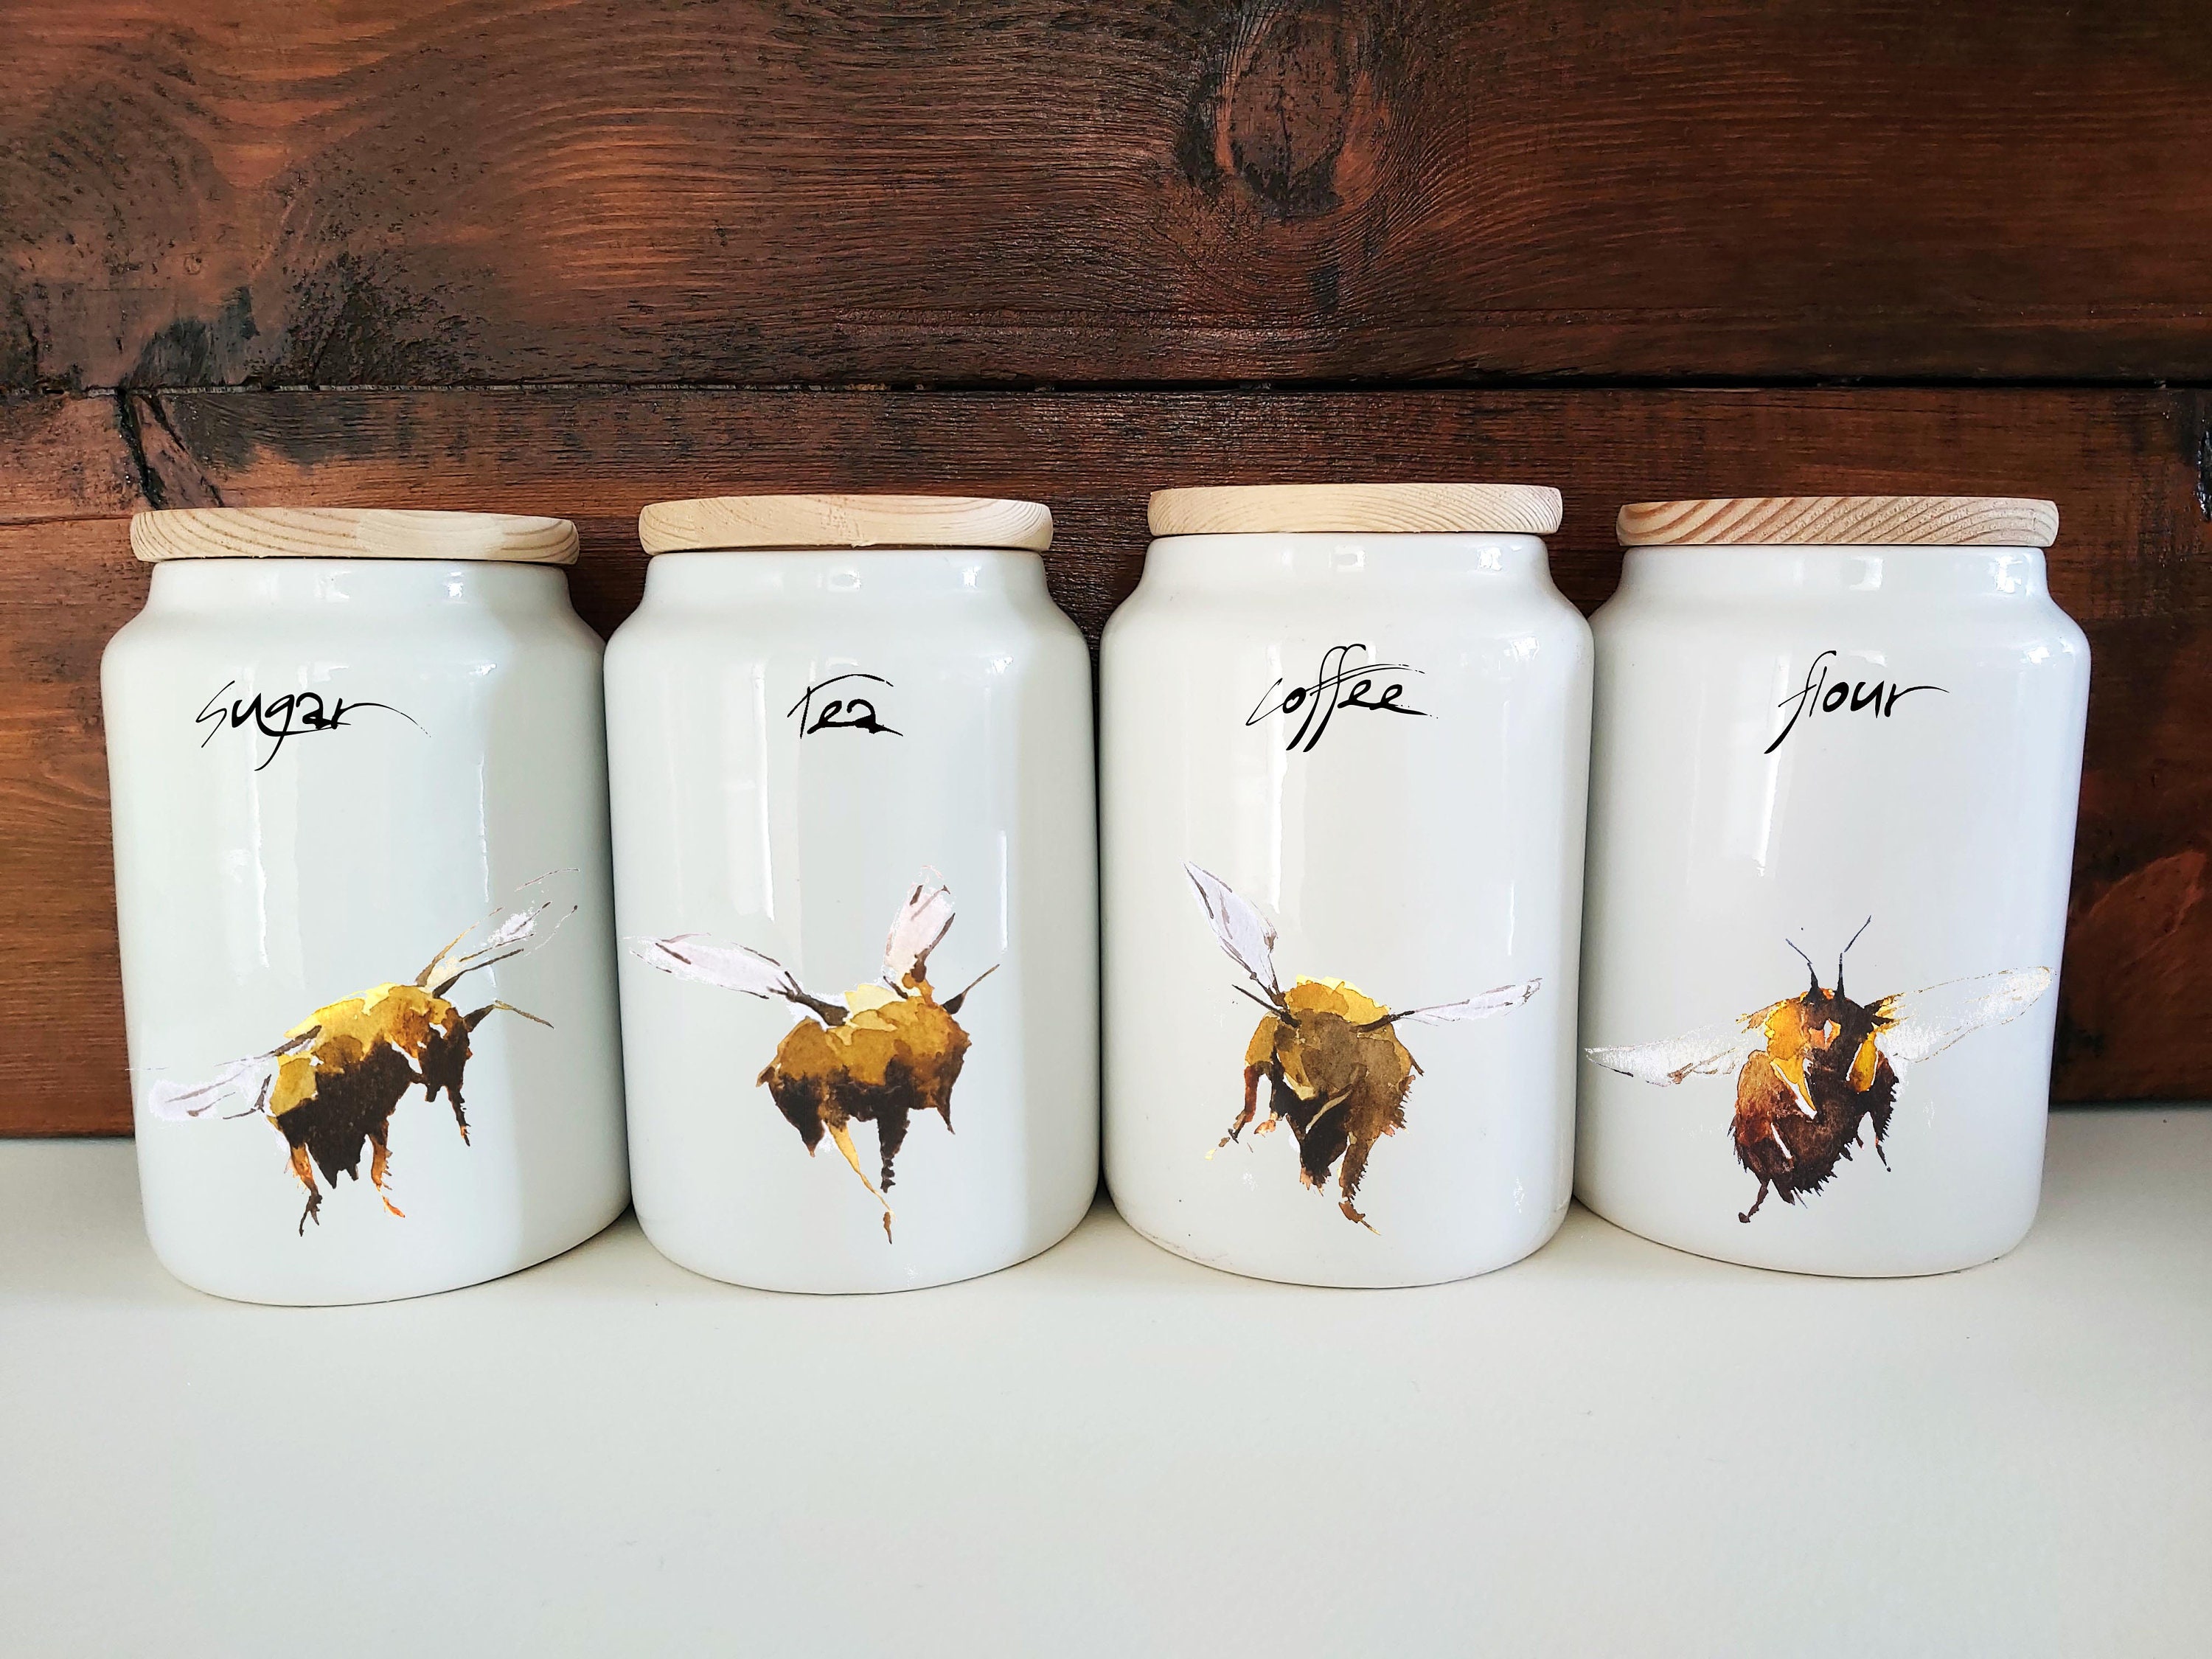 Bee Decor, Honey Bee Decor, Bee Scoop for Rae Dunn Canister, Bee